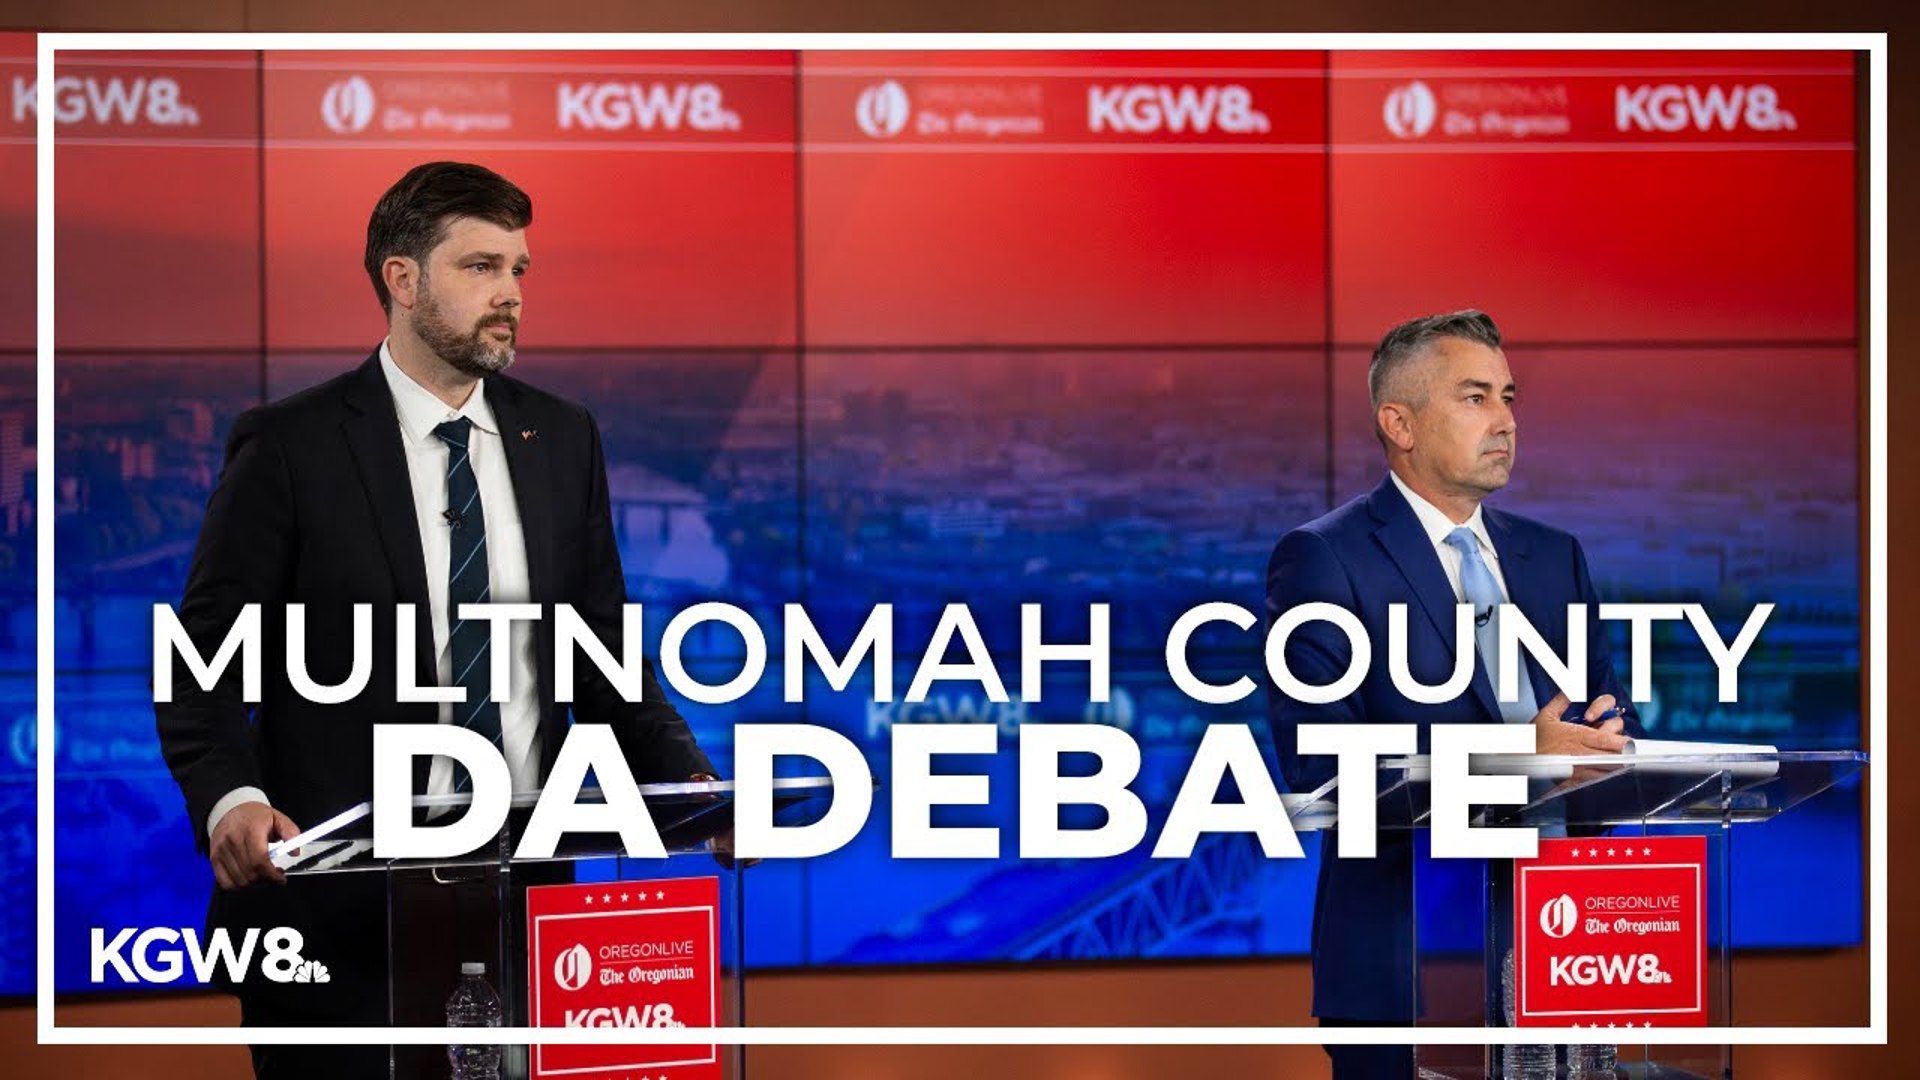 Incumbent DA Mike Schmidt and challenger Senior Deputy DA Nathan Vasquez went back and forth on key issues such as homelessness, the drug crisis and crime.